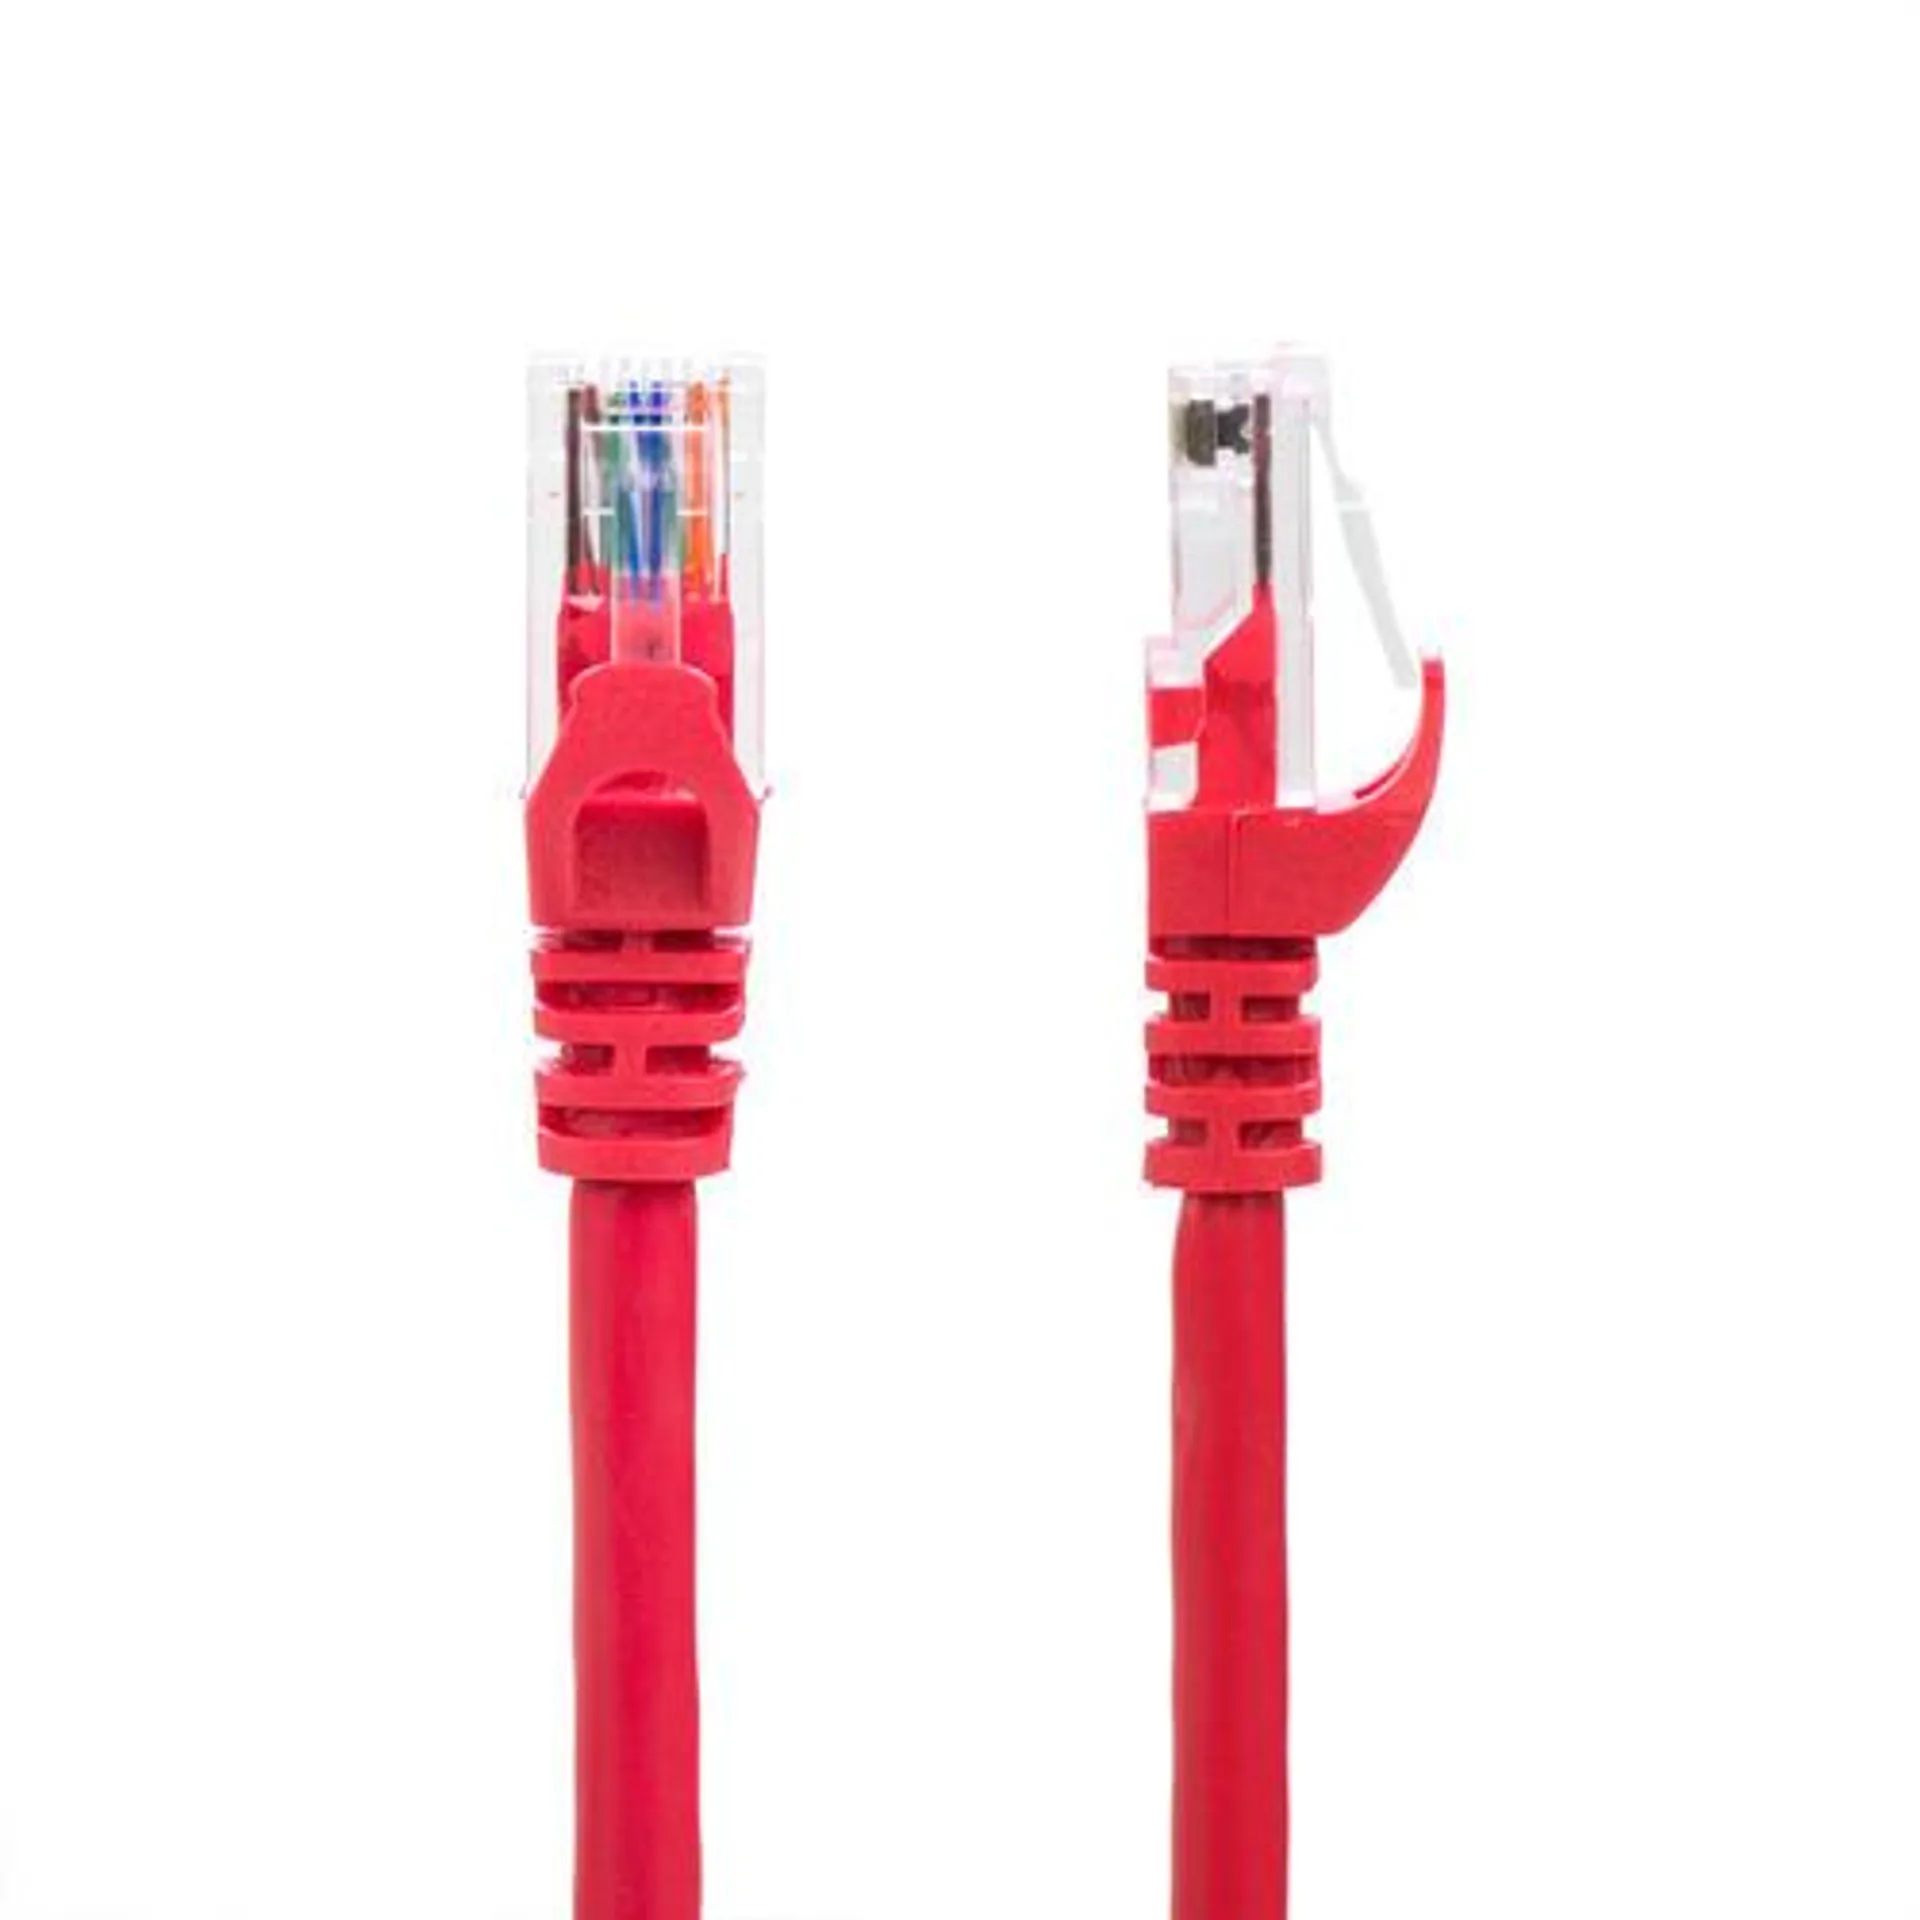 1FT Cat6 550MHz UTP 24AWG RJ45 Ethernet Network Cable - Red - PrimeCables® - 1/Pack